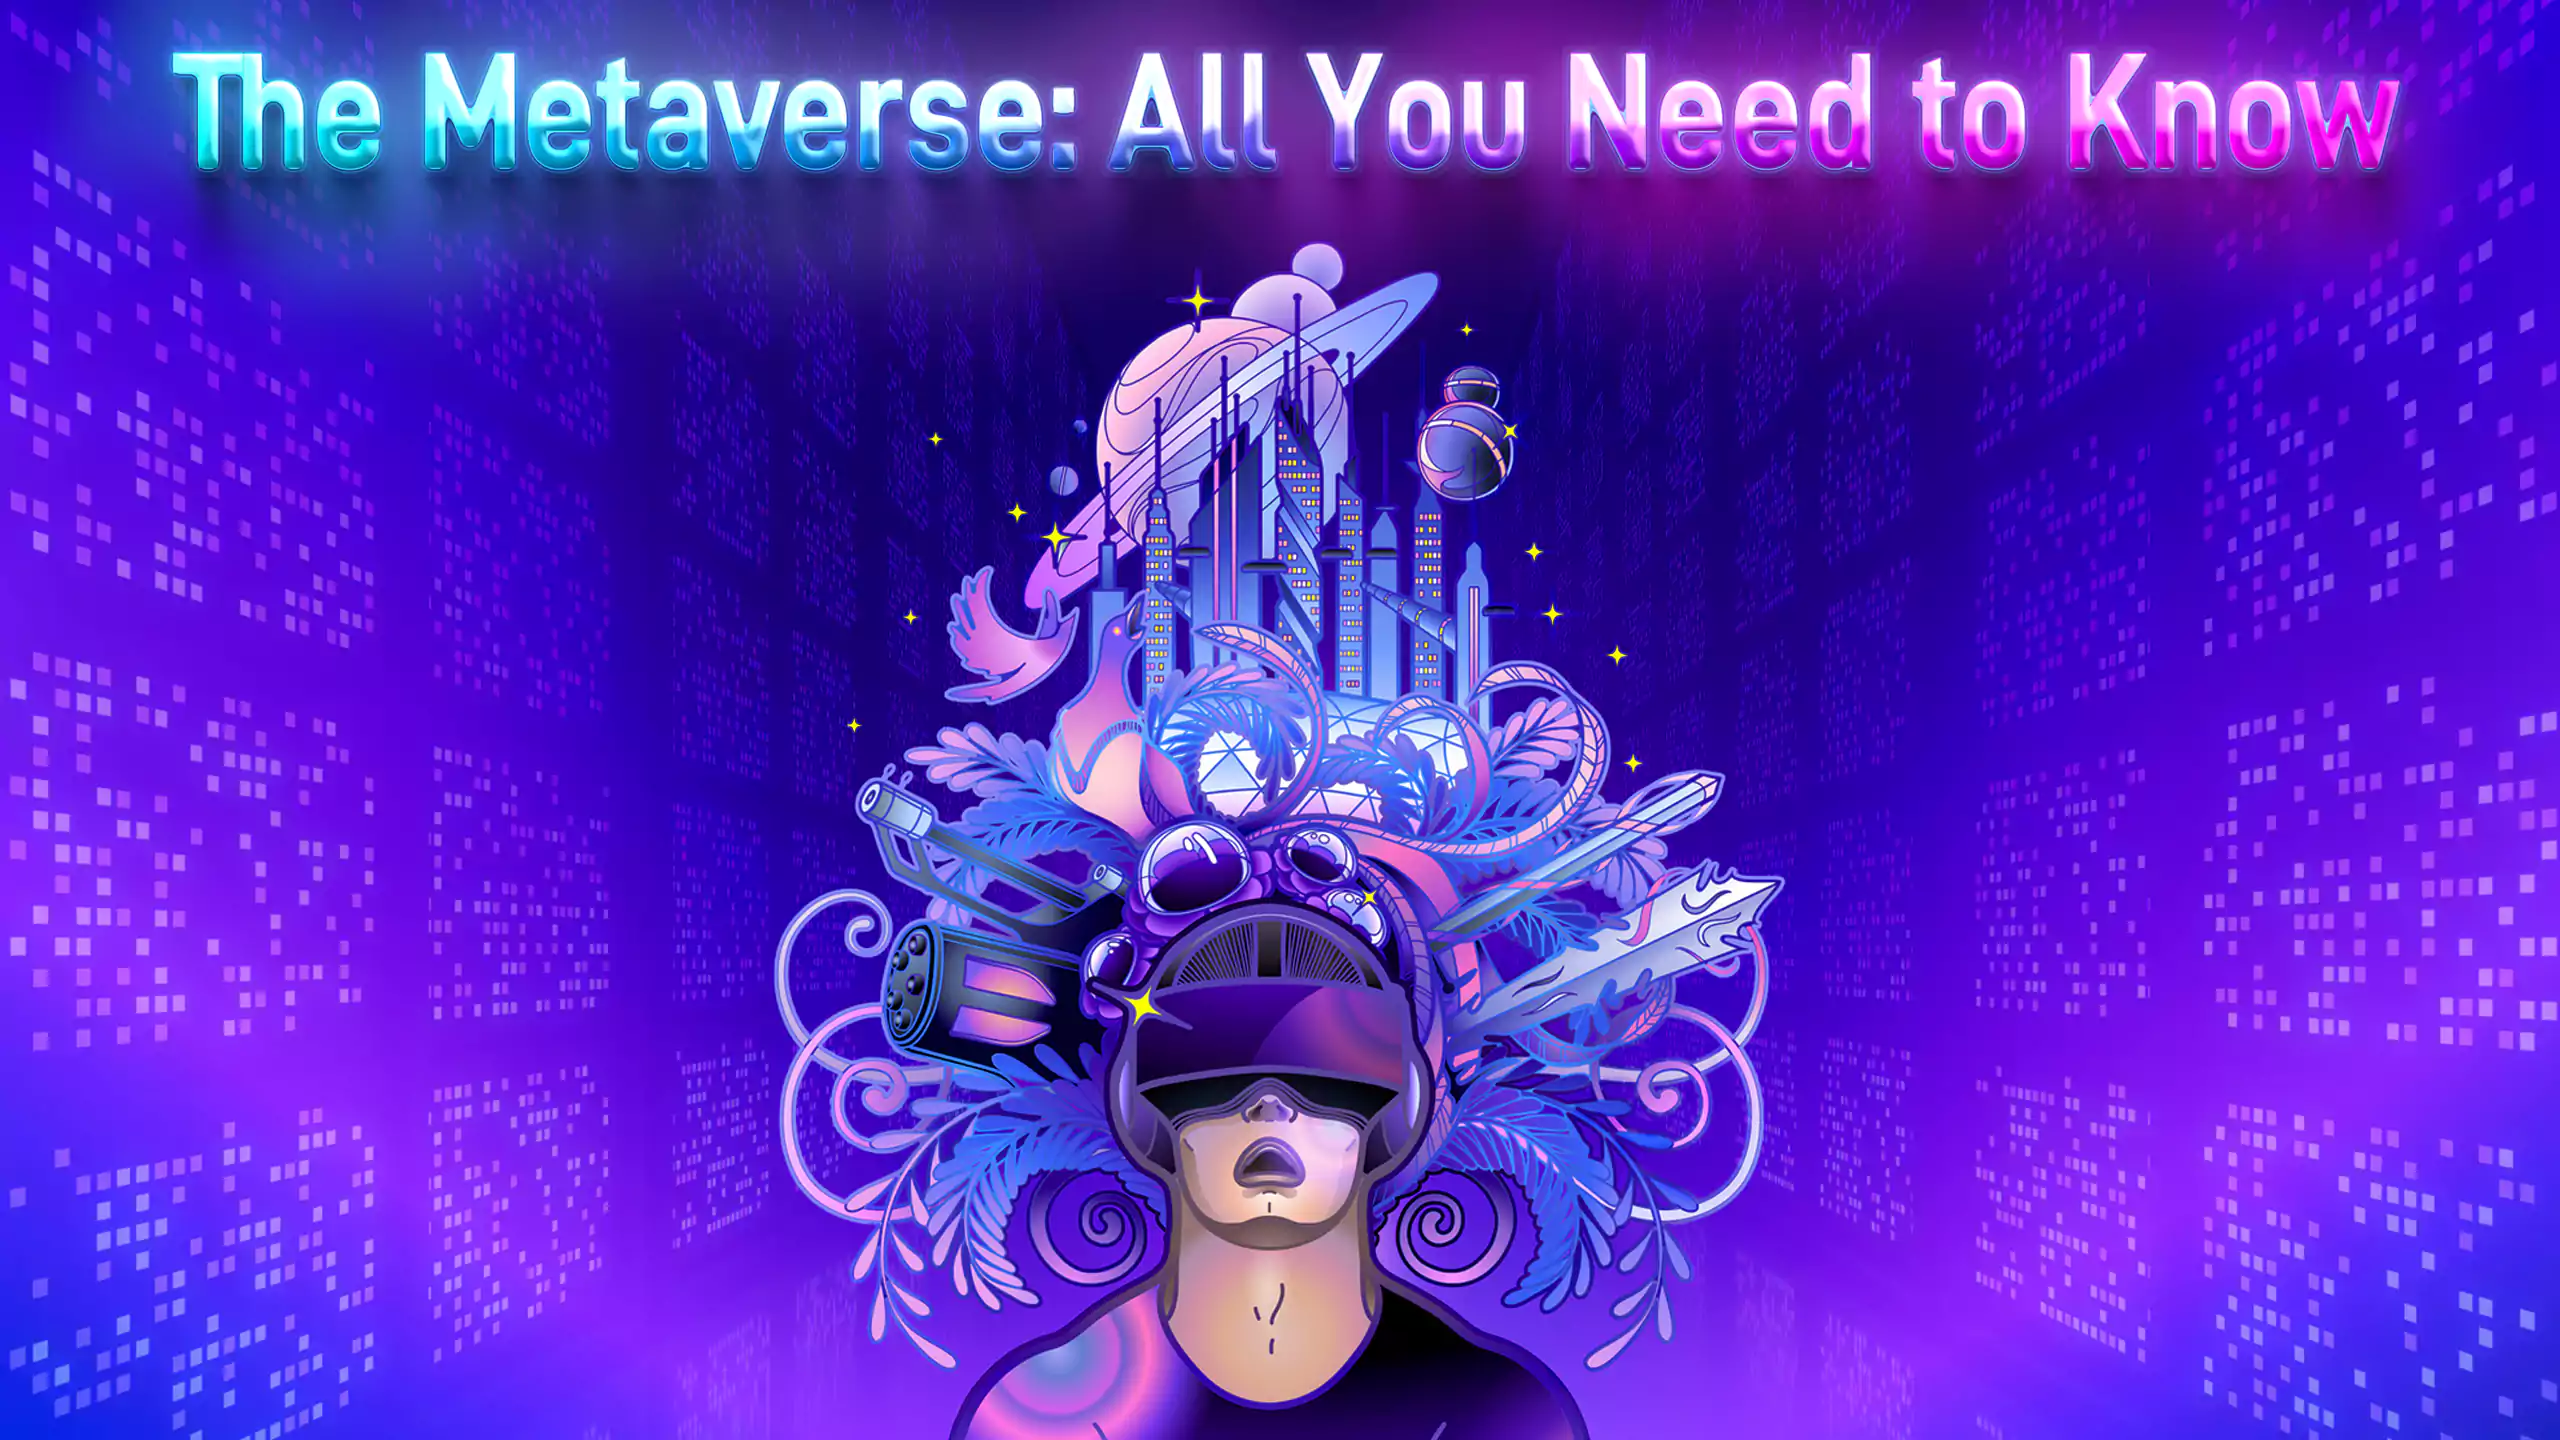 The Metaverse: All You Need to Know